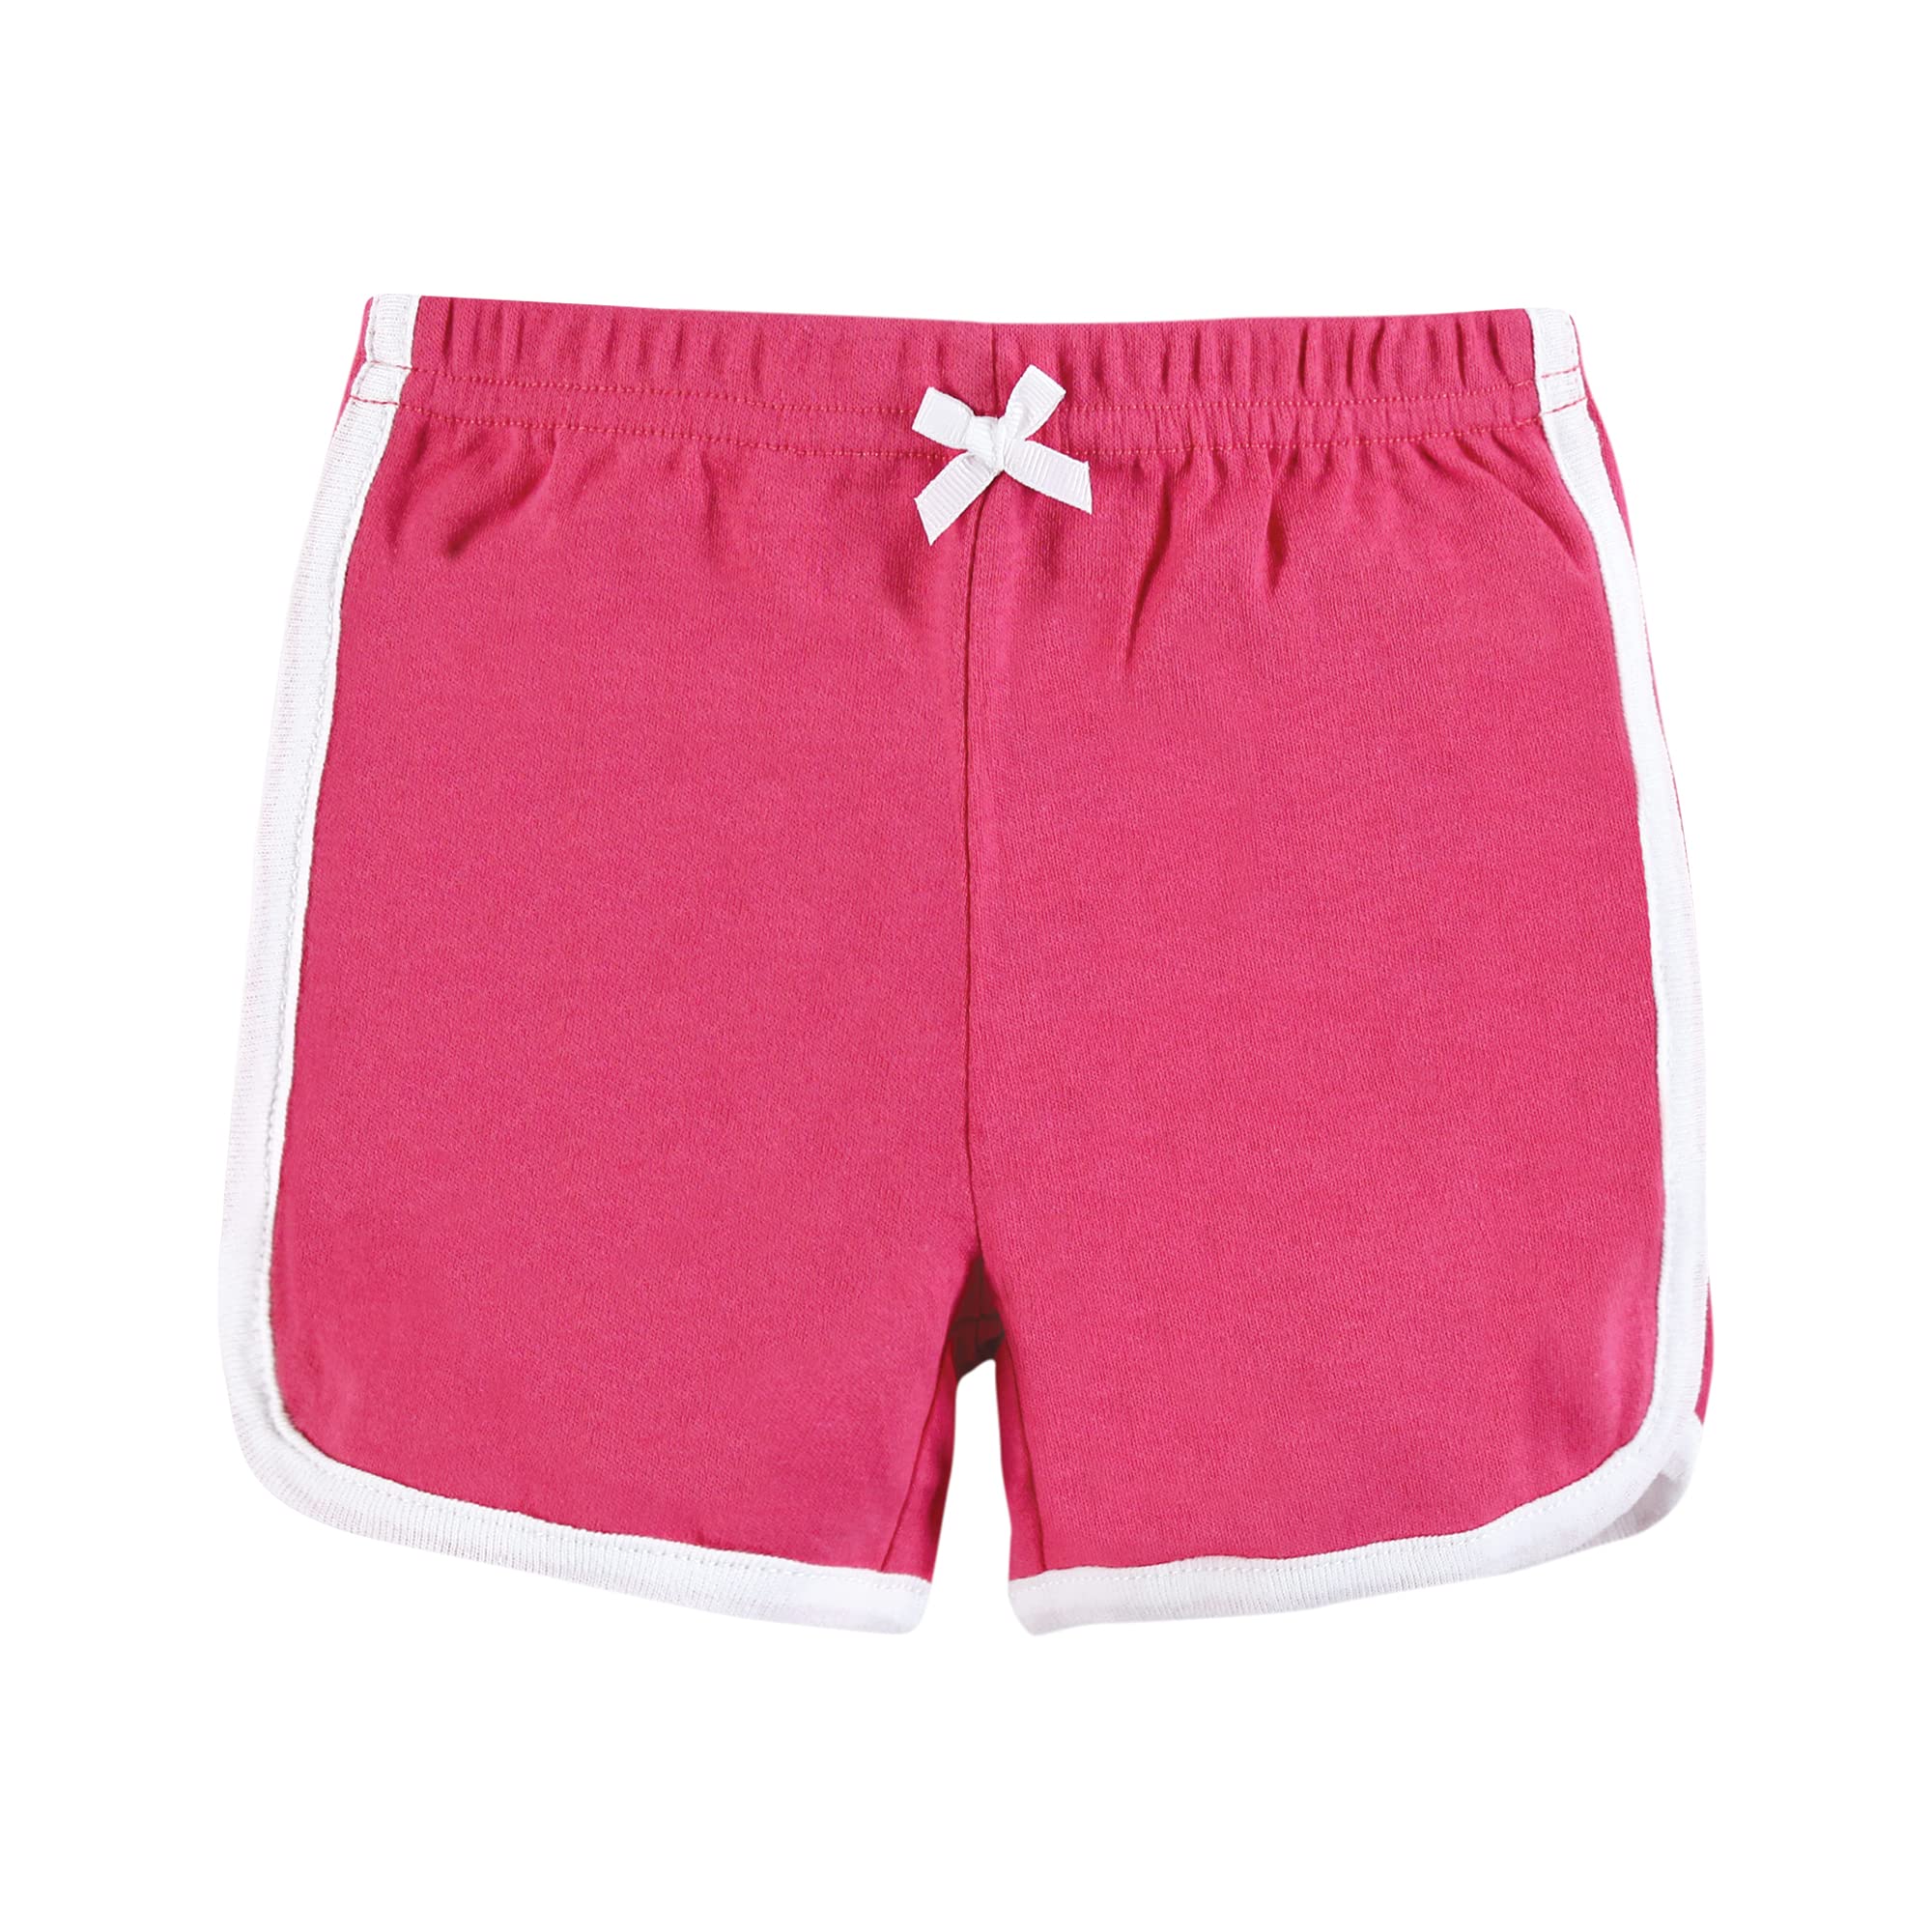 Hudson Baby Unisex Baby and Toddler Shorts Bottoms 4-Pack, Pink Black, 3-6 Months